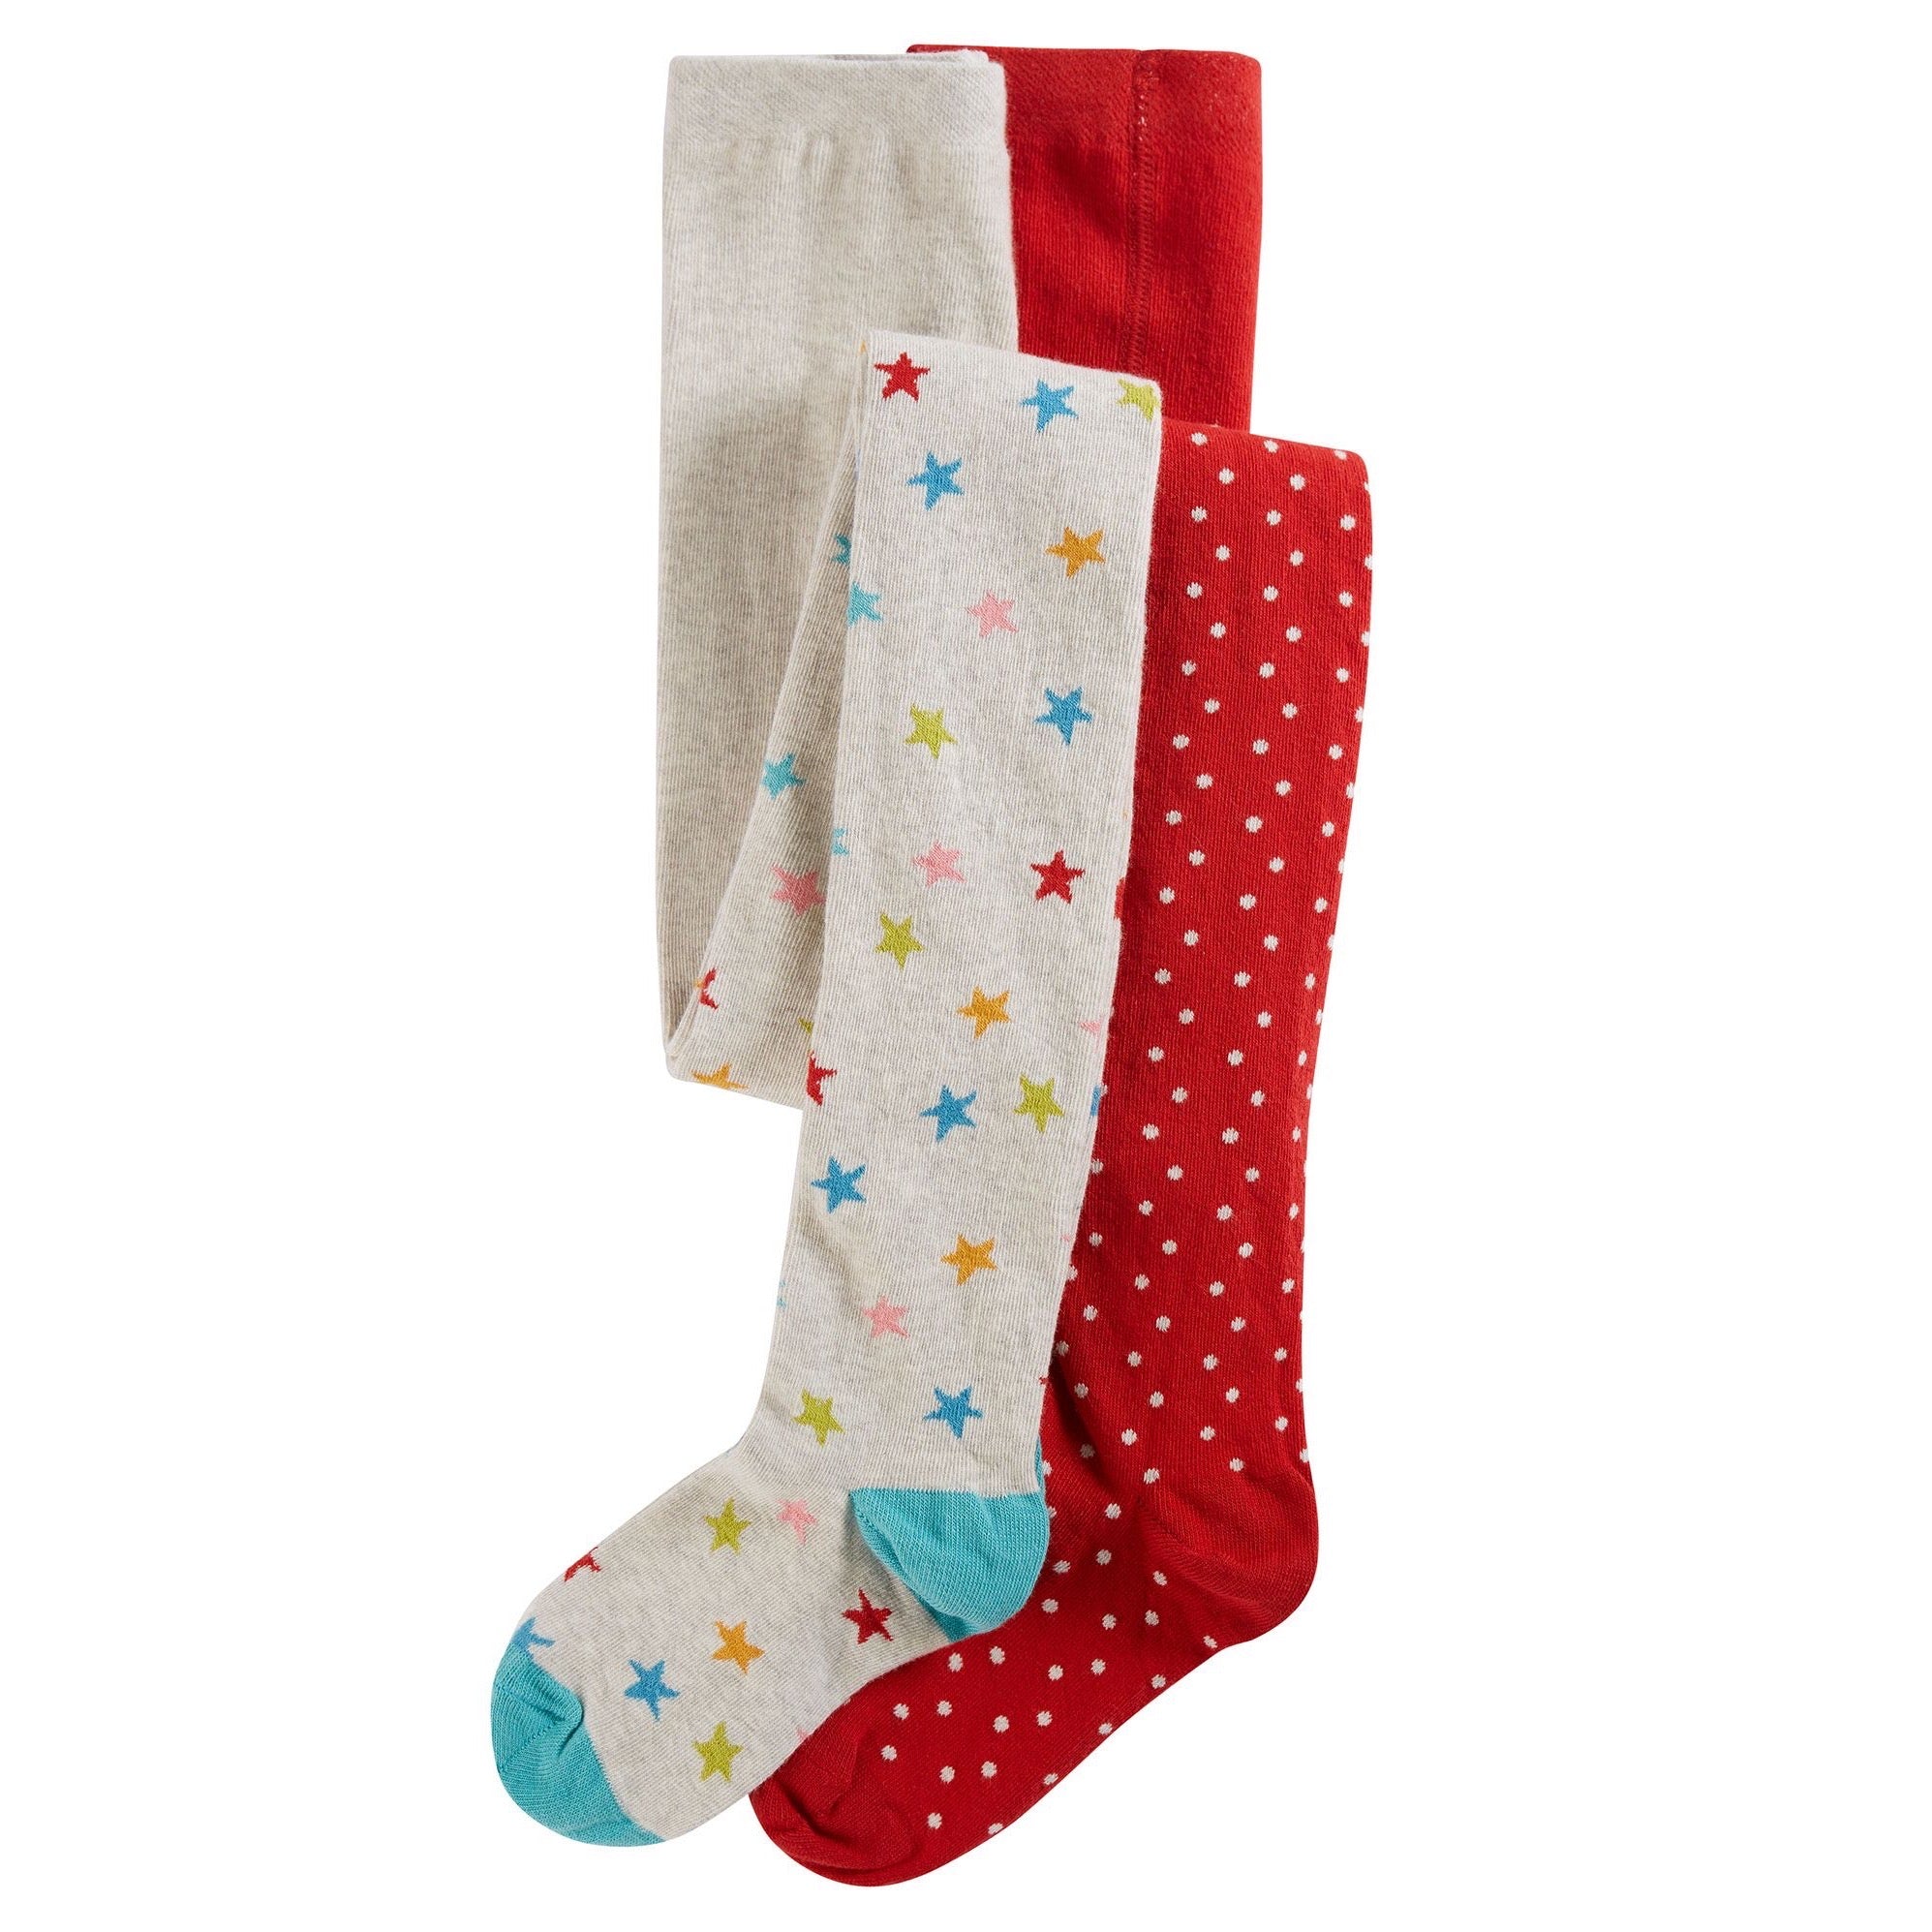 Frugi 2 Pack Norah Tights Red Spot Oatmeal Stars Clothing 2-4YRS / Multi,4-6YRS / Multi,6-8YRS / Multi,8-10YRS / Multi